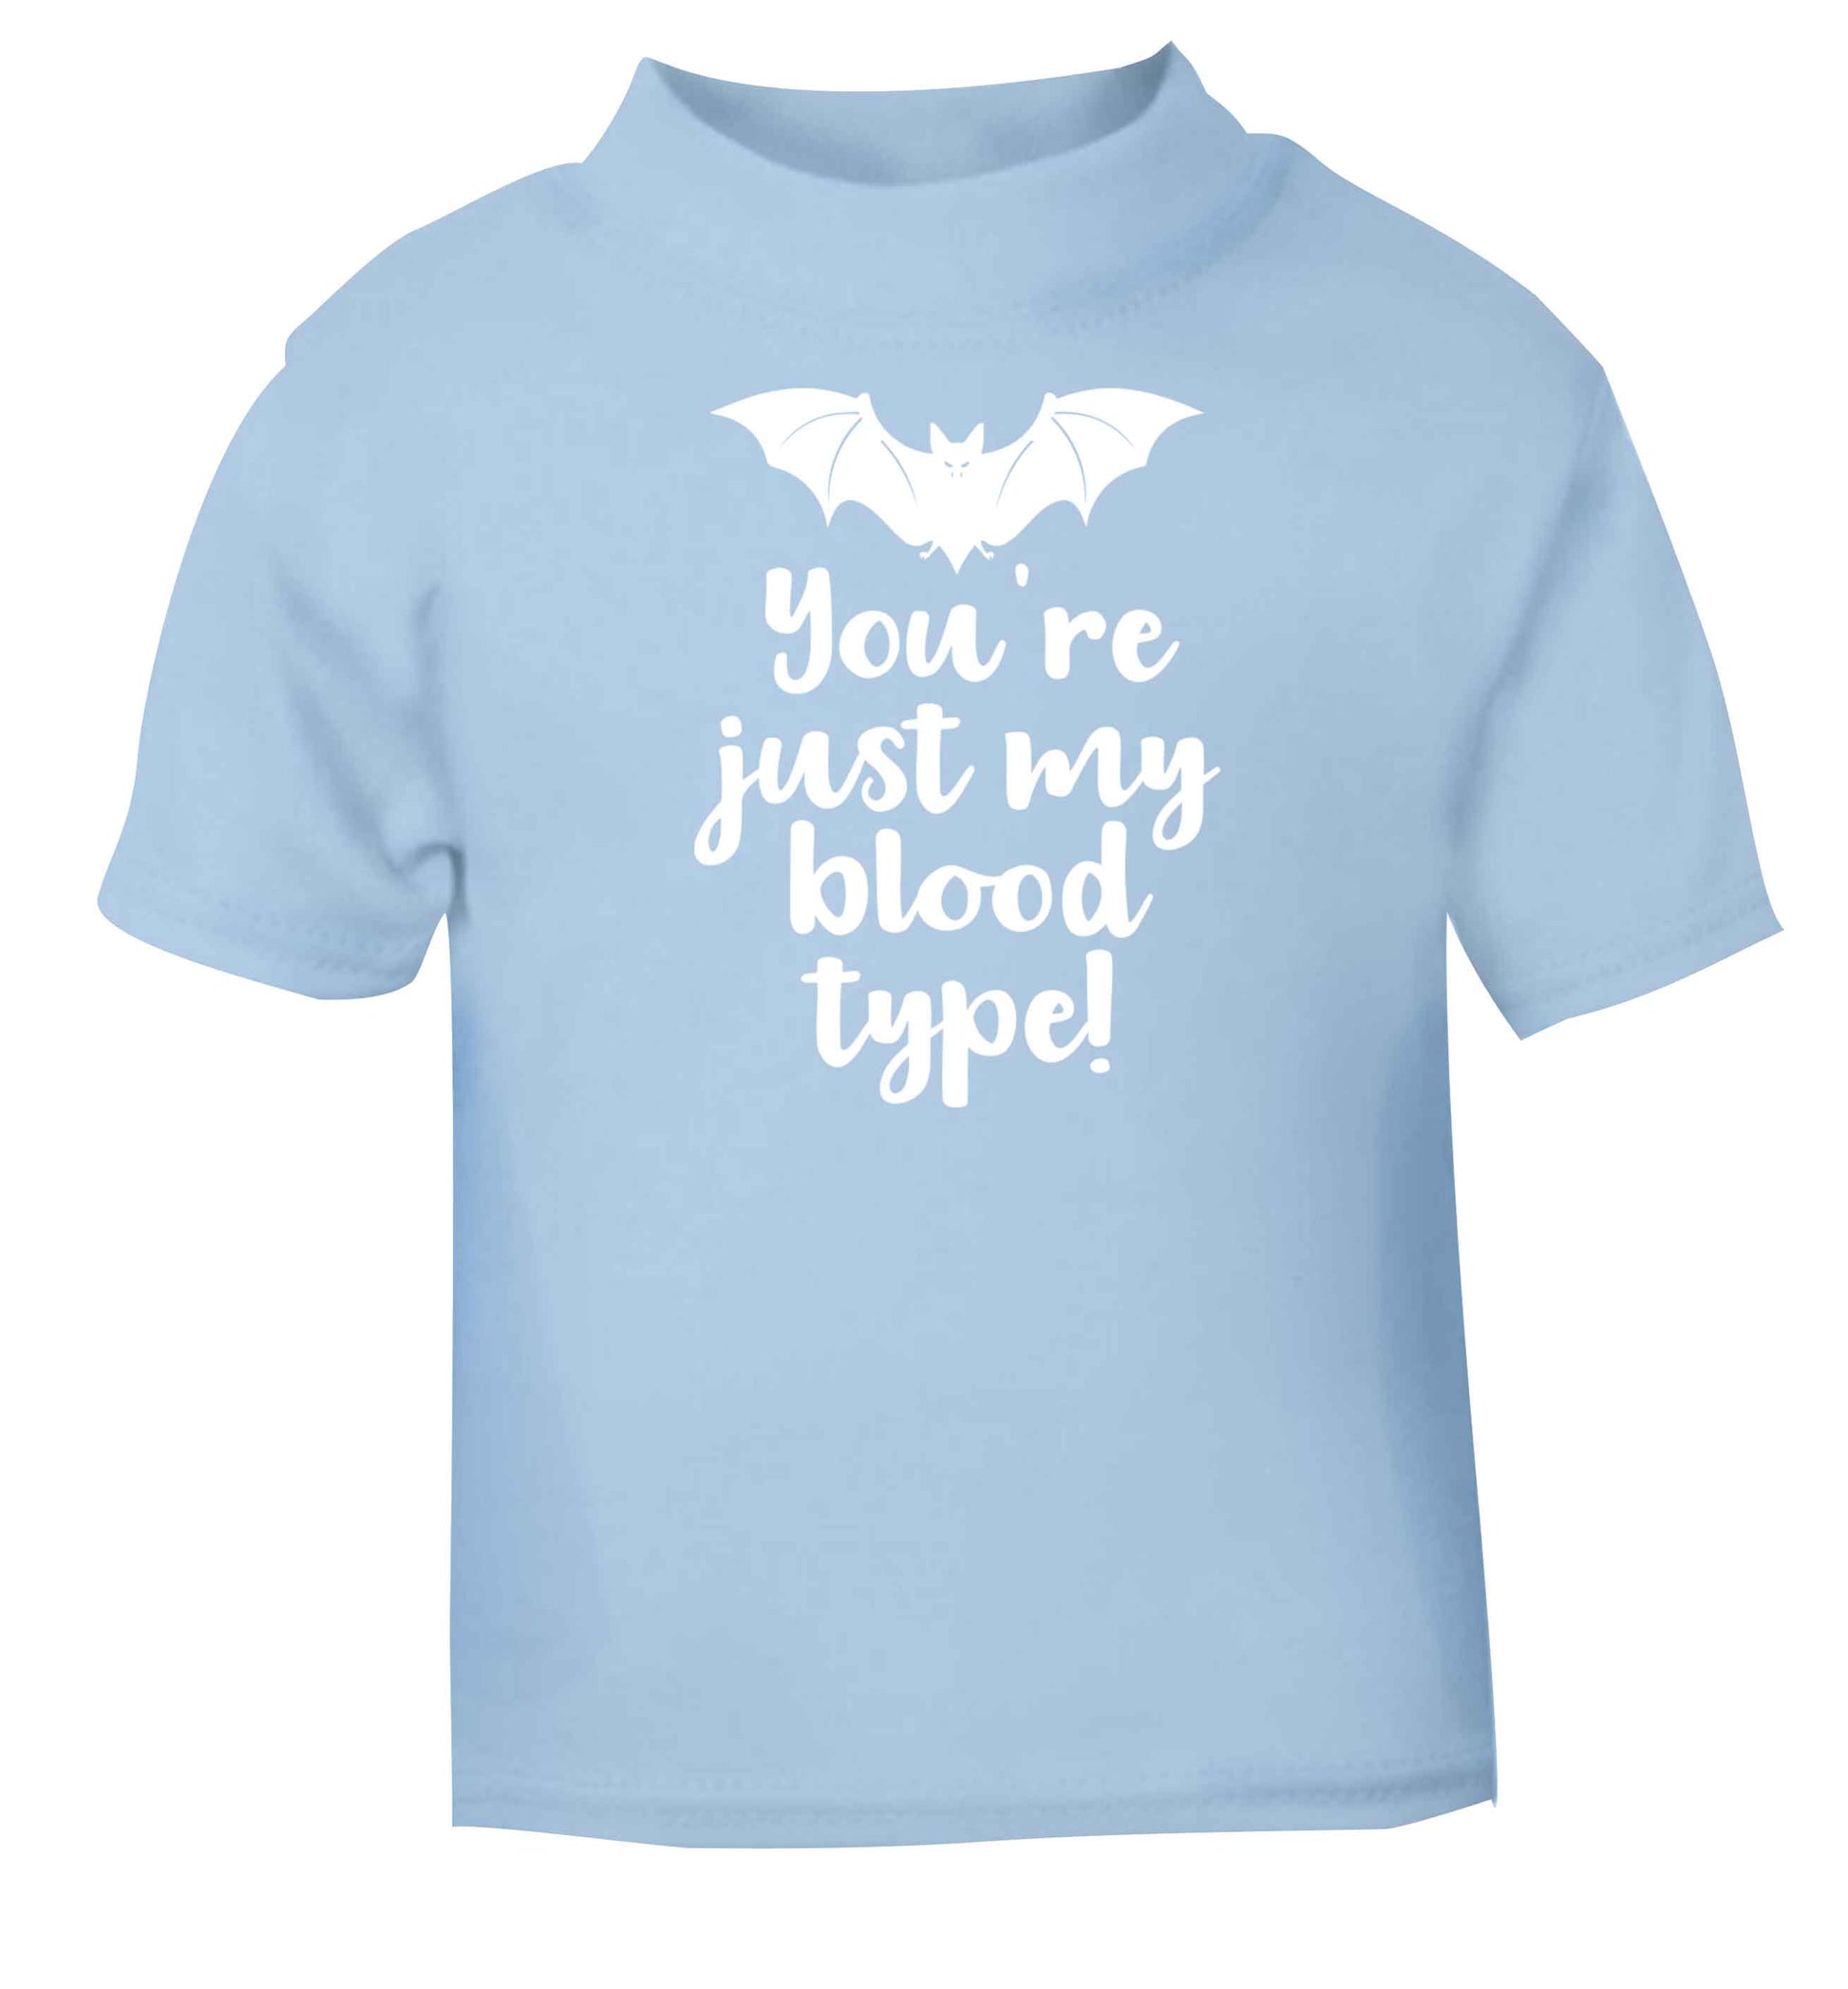 You're just my blood type light blue baby toddler Tshirt 2 Years